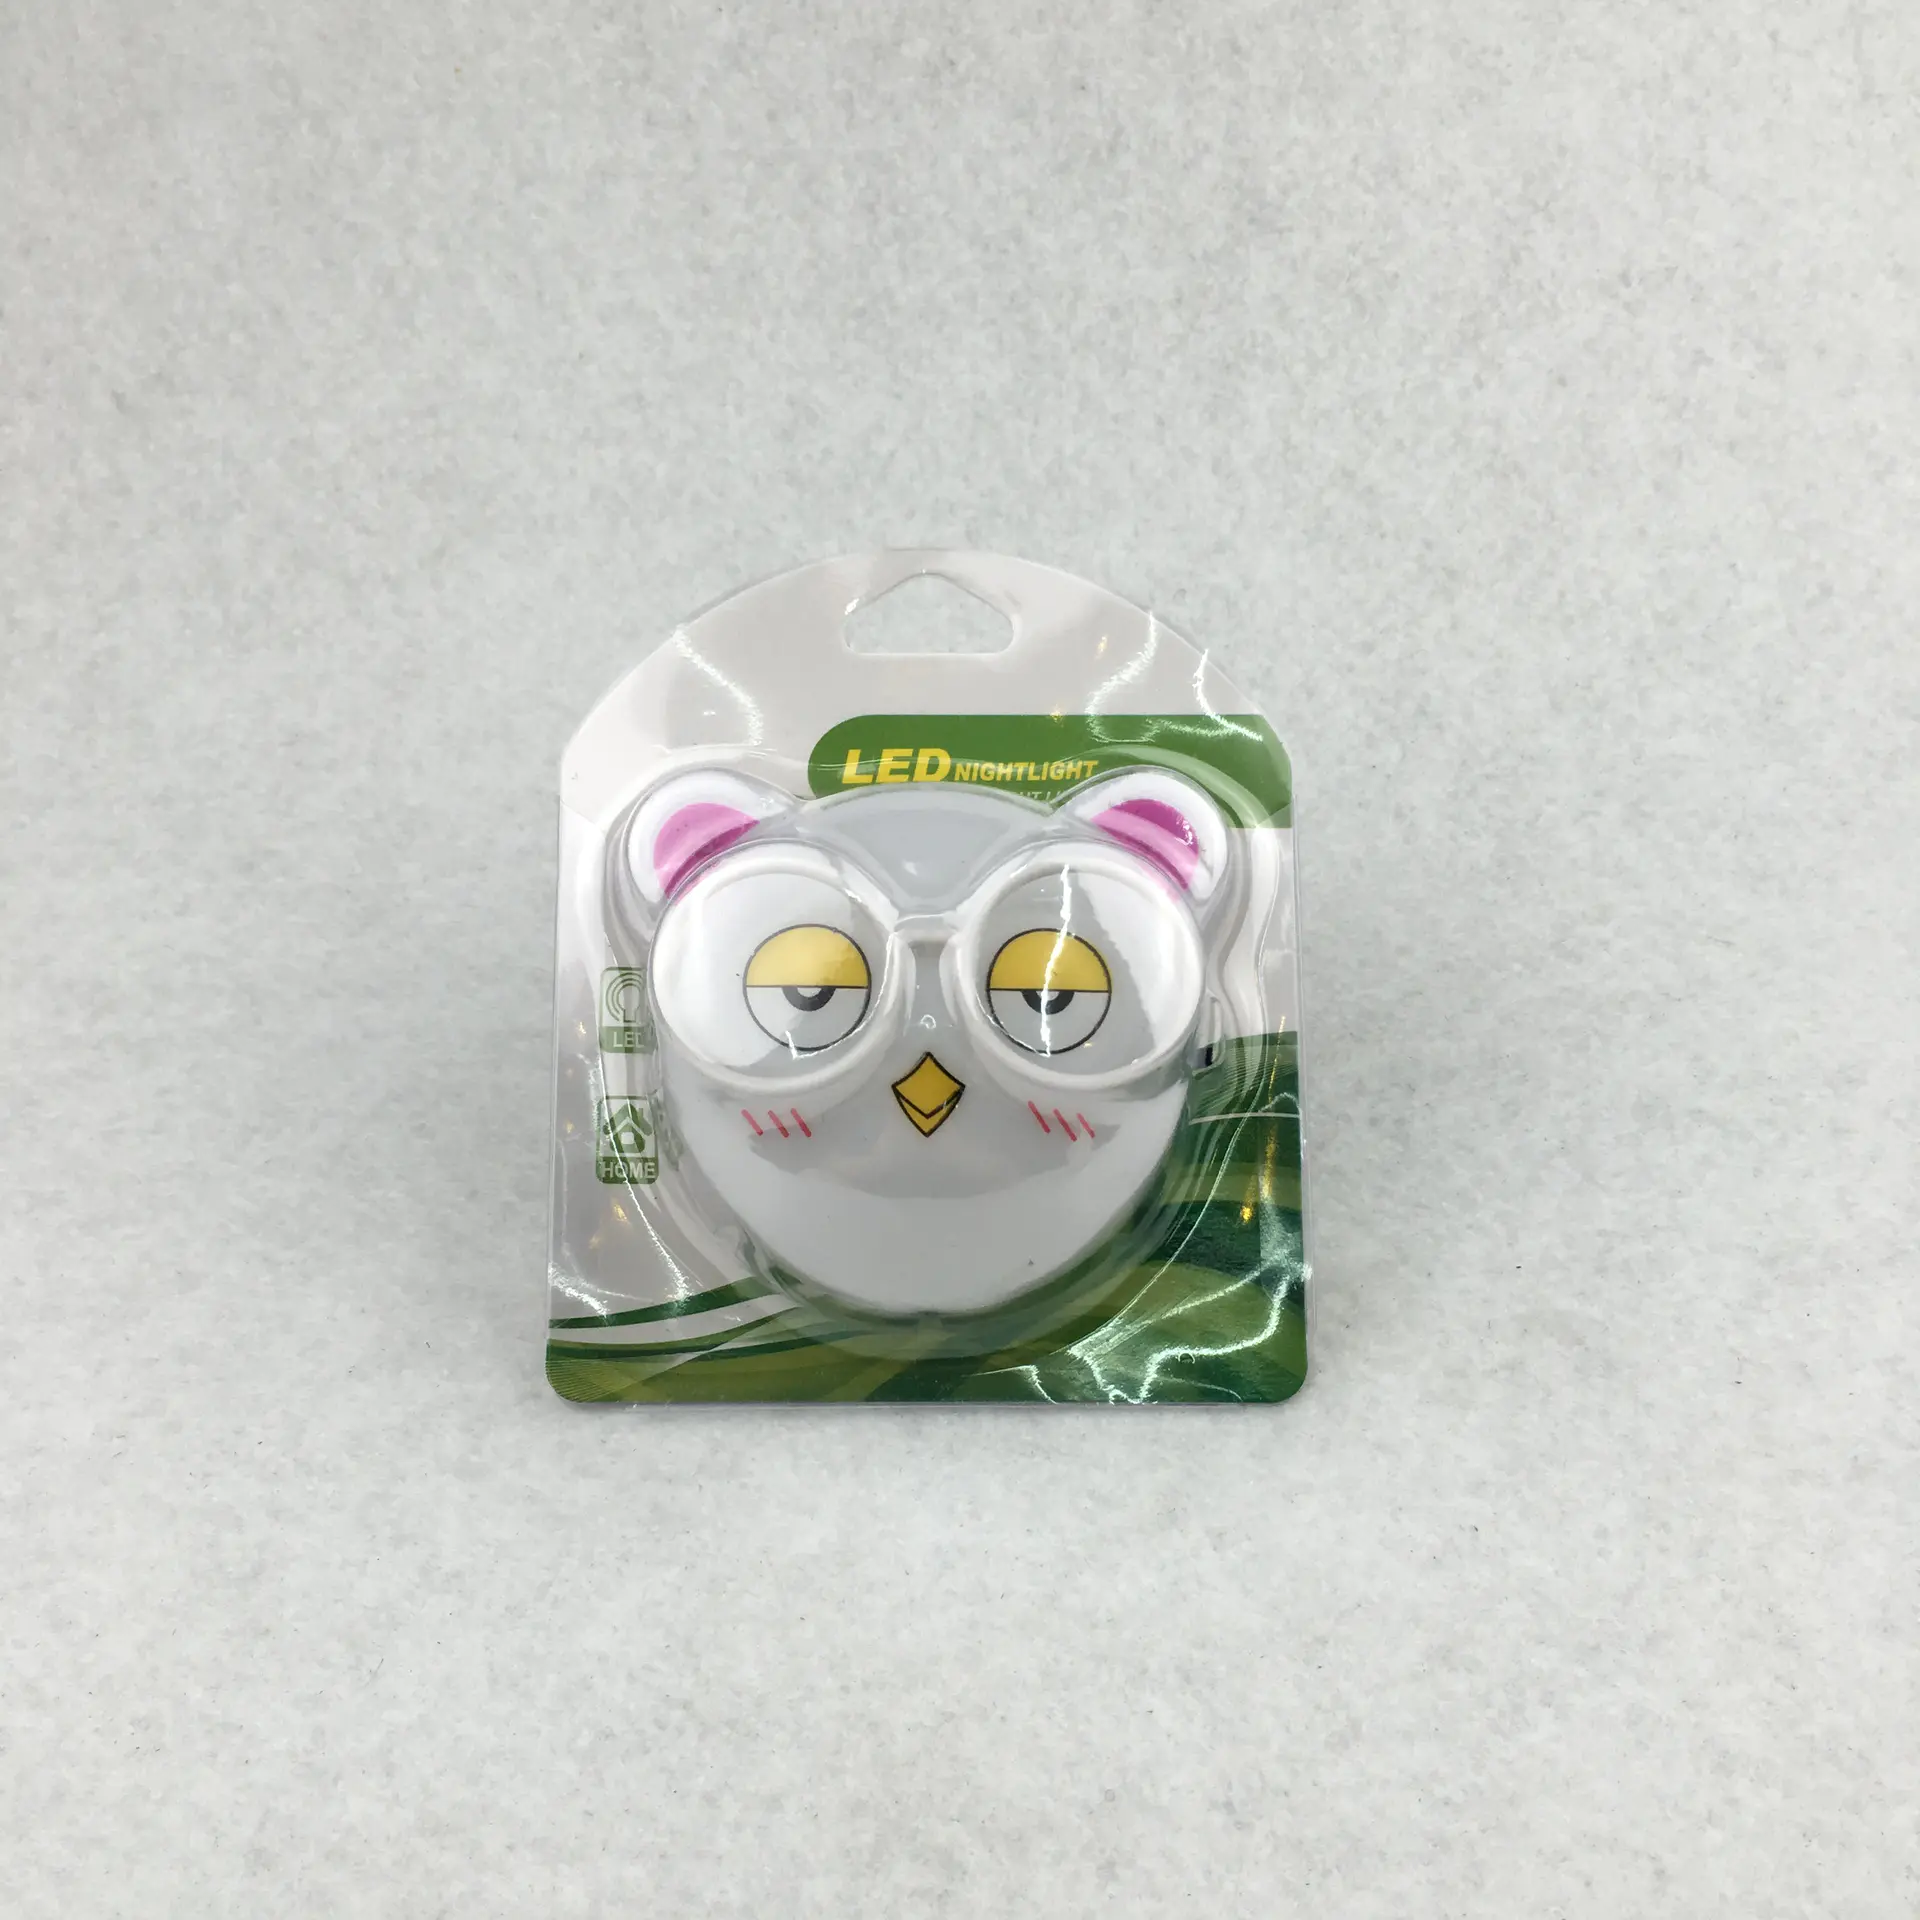 plug in night light with 0.6W and 110V or 220V W025 KITTY Animal cat shape LED SMD mini switch